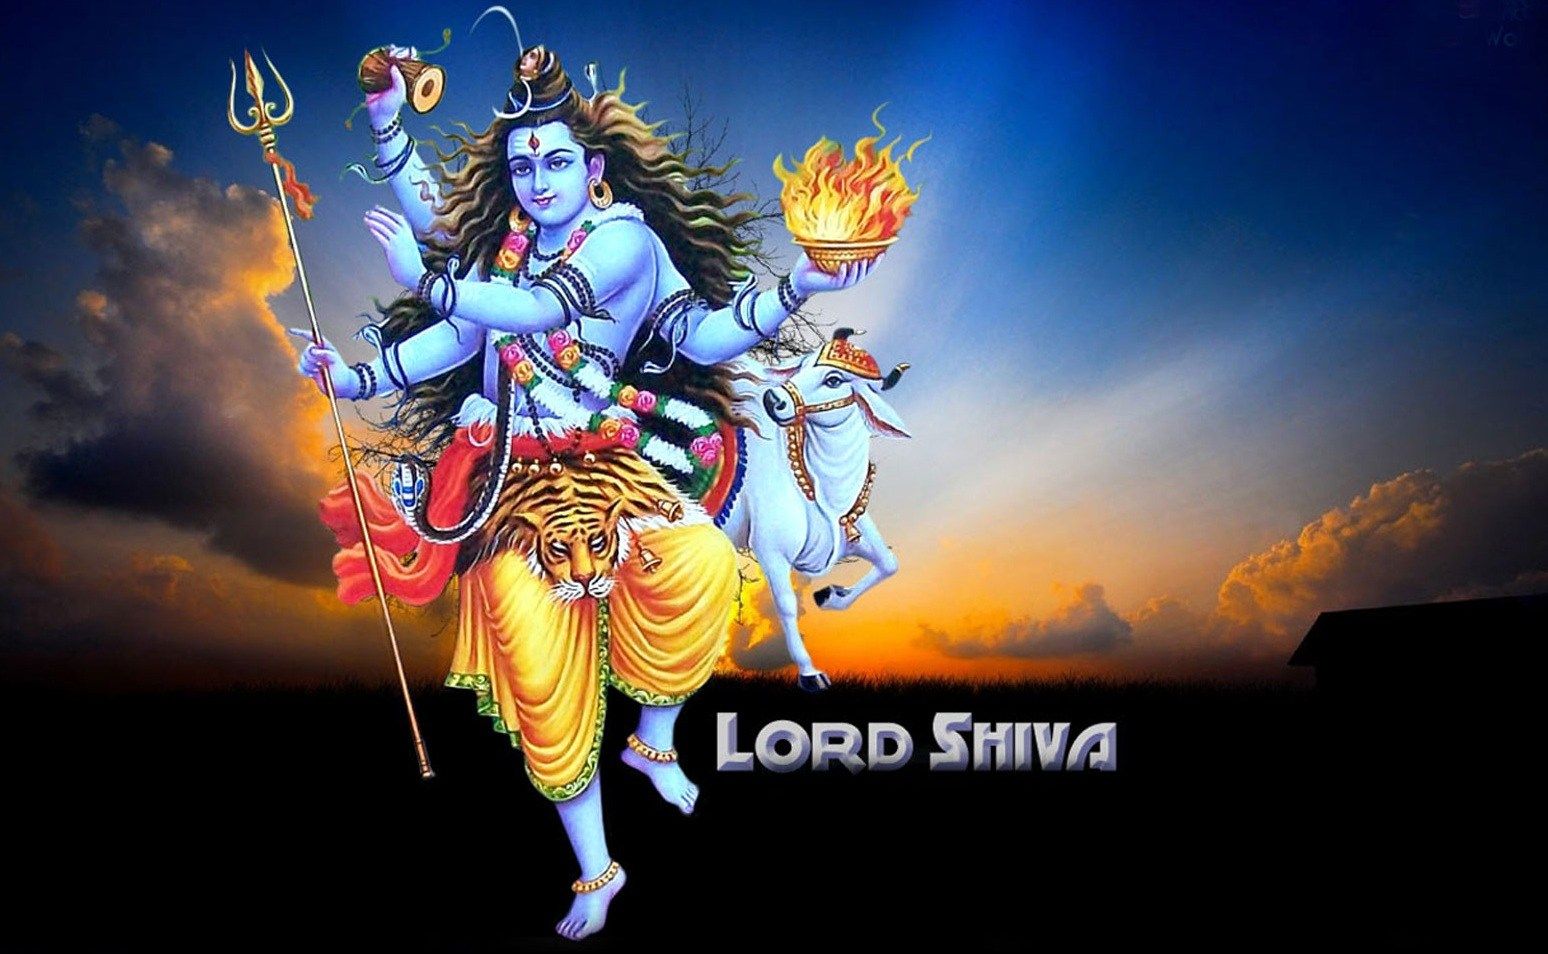 DOWNLOAD IMAGES OF LORD SHIVA HD